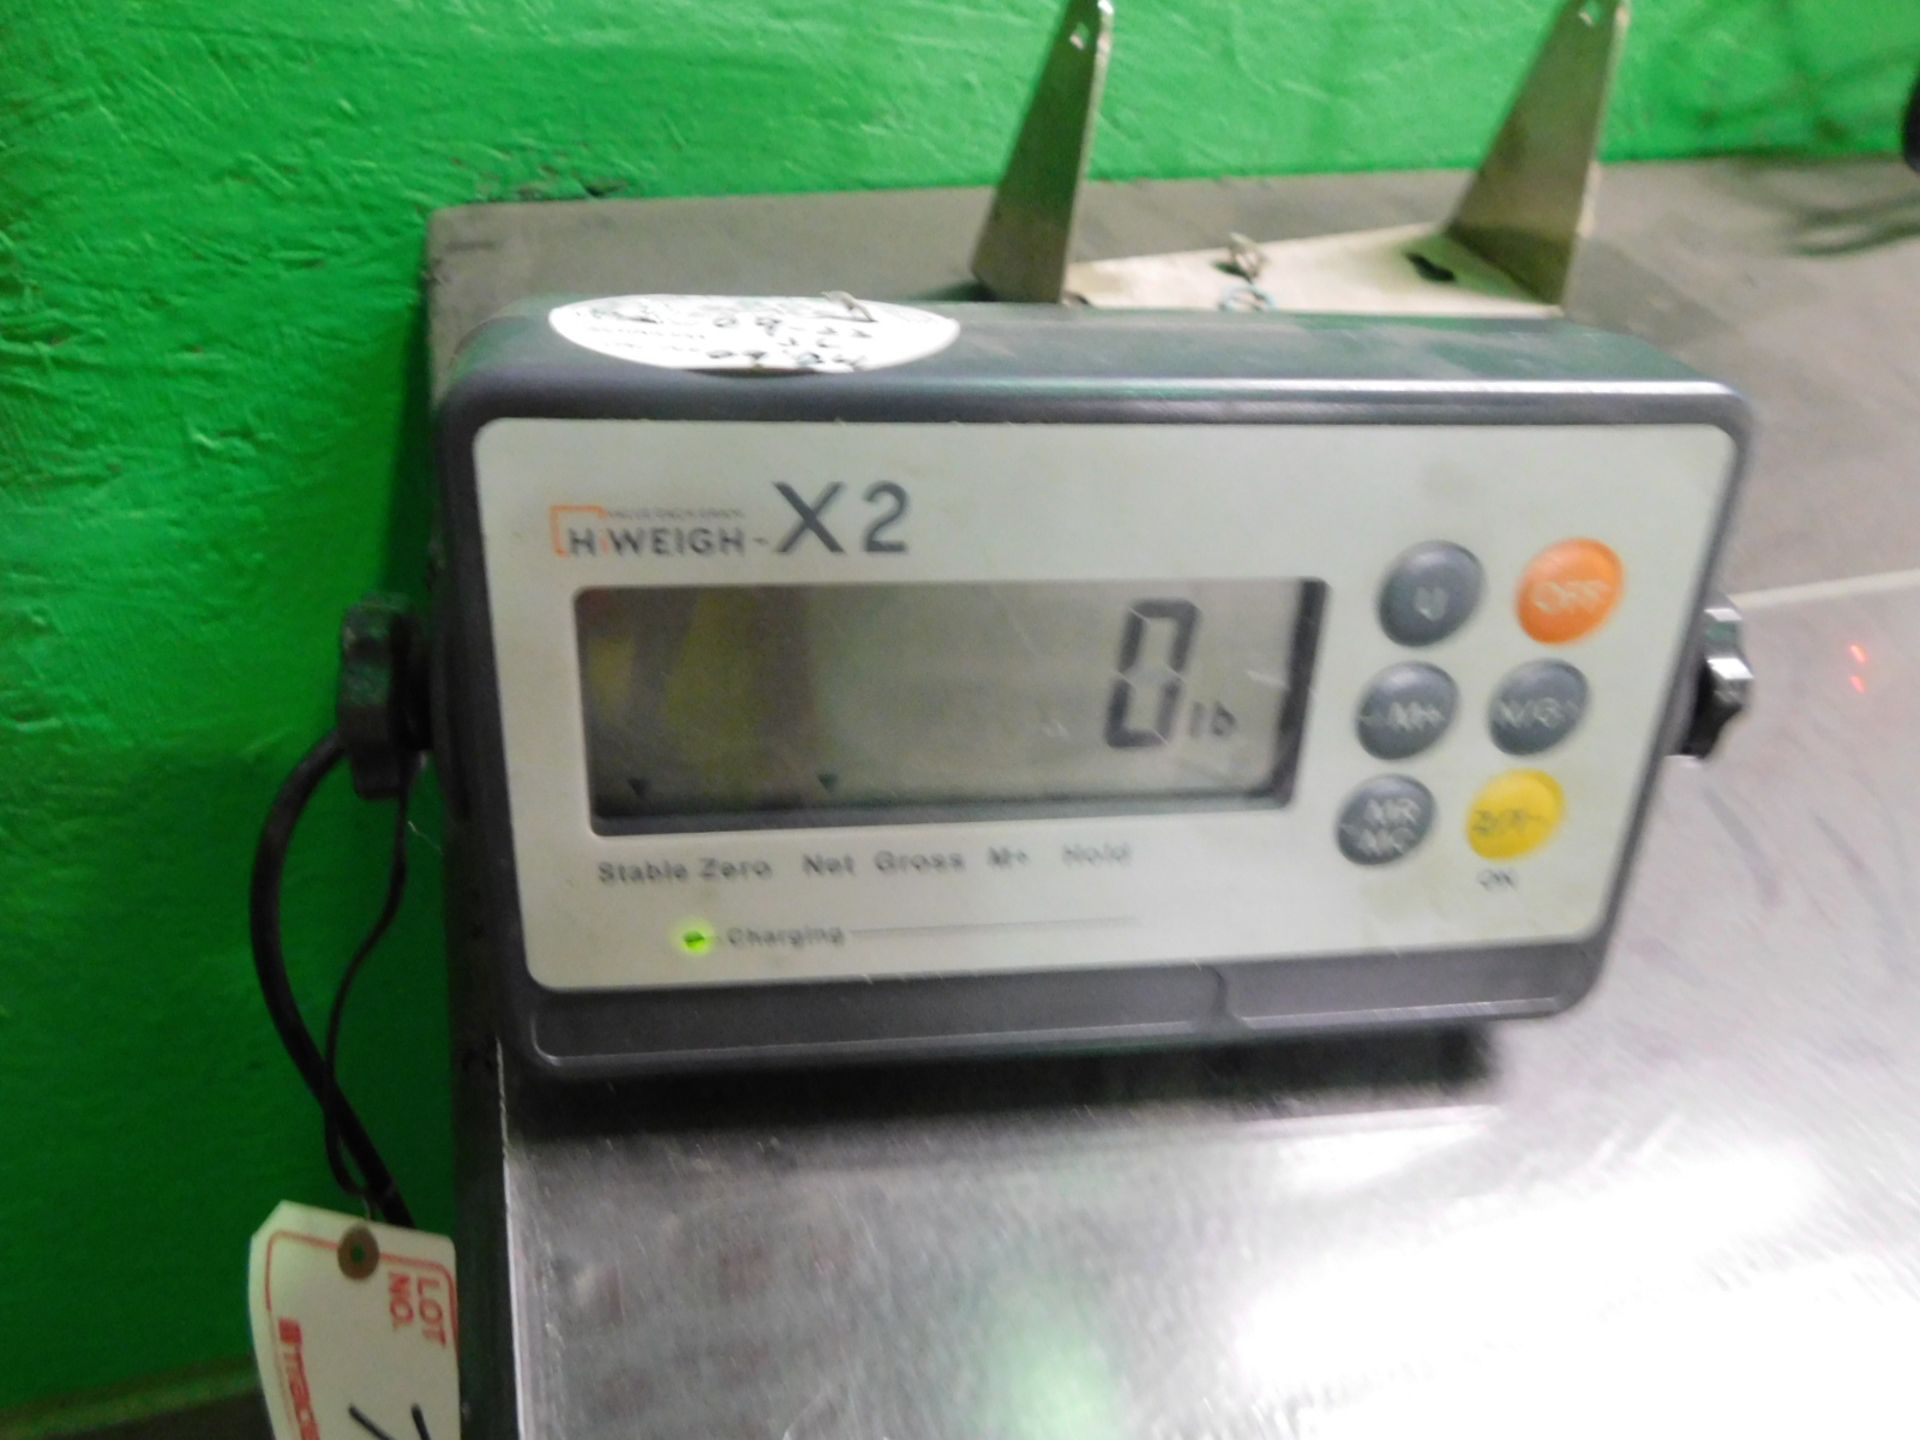 5' X 5' PALLET SCALE W/ HI-WEIGH X 2 CONTROL READOUT - Image 2 of 2